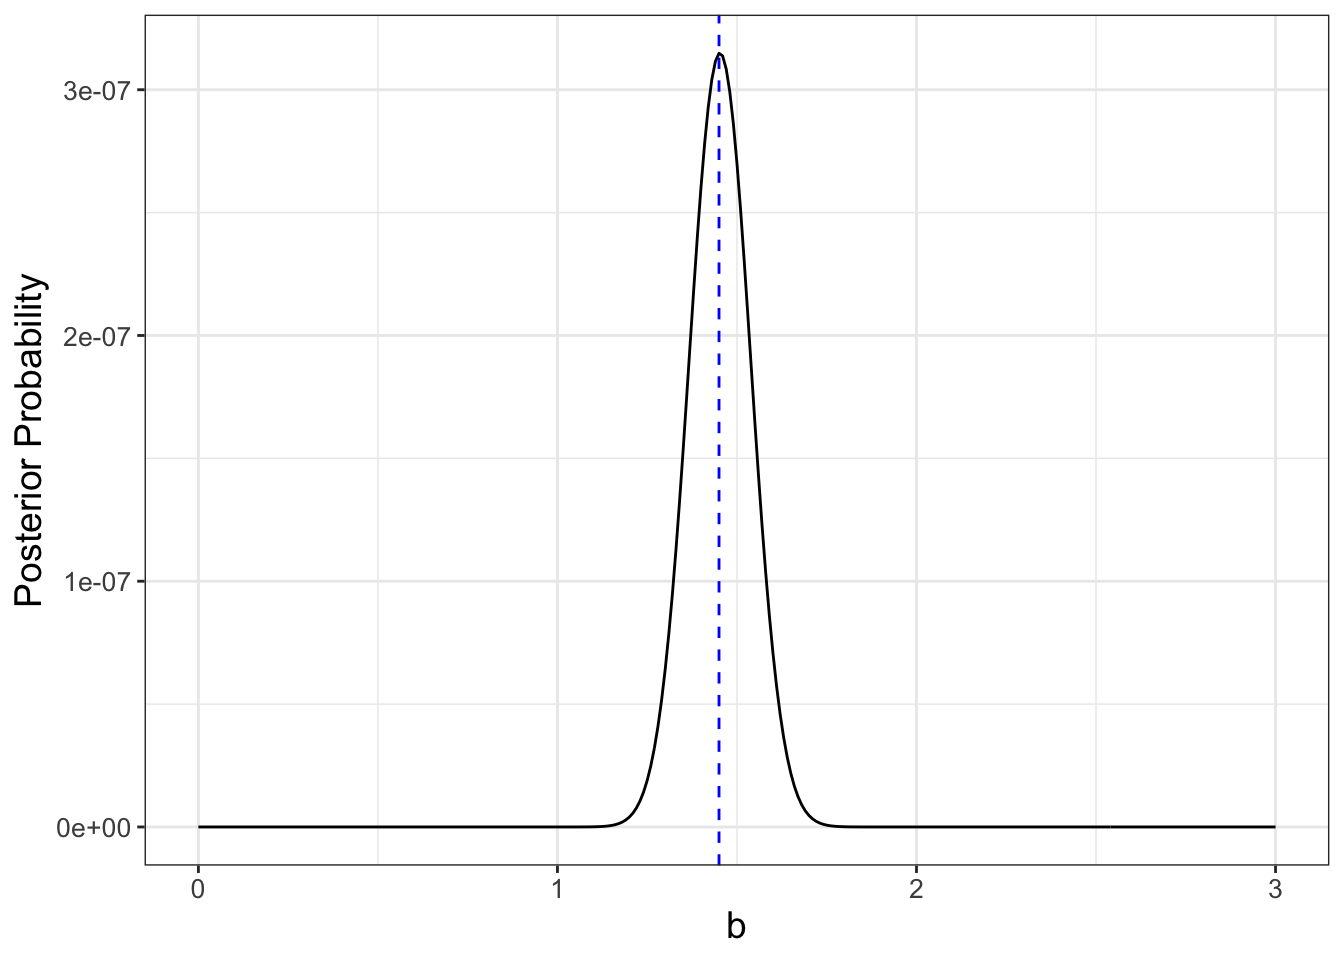 Equation \@ref(eq:likelihood-bayes-10) with optimum value at $b=1.45$ denoted in a blue dashed line. 